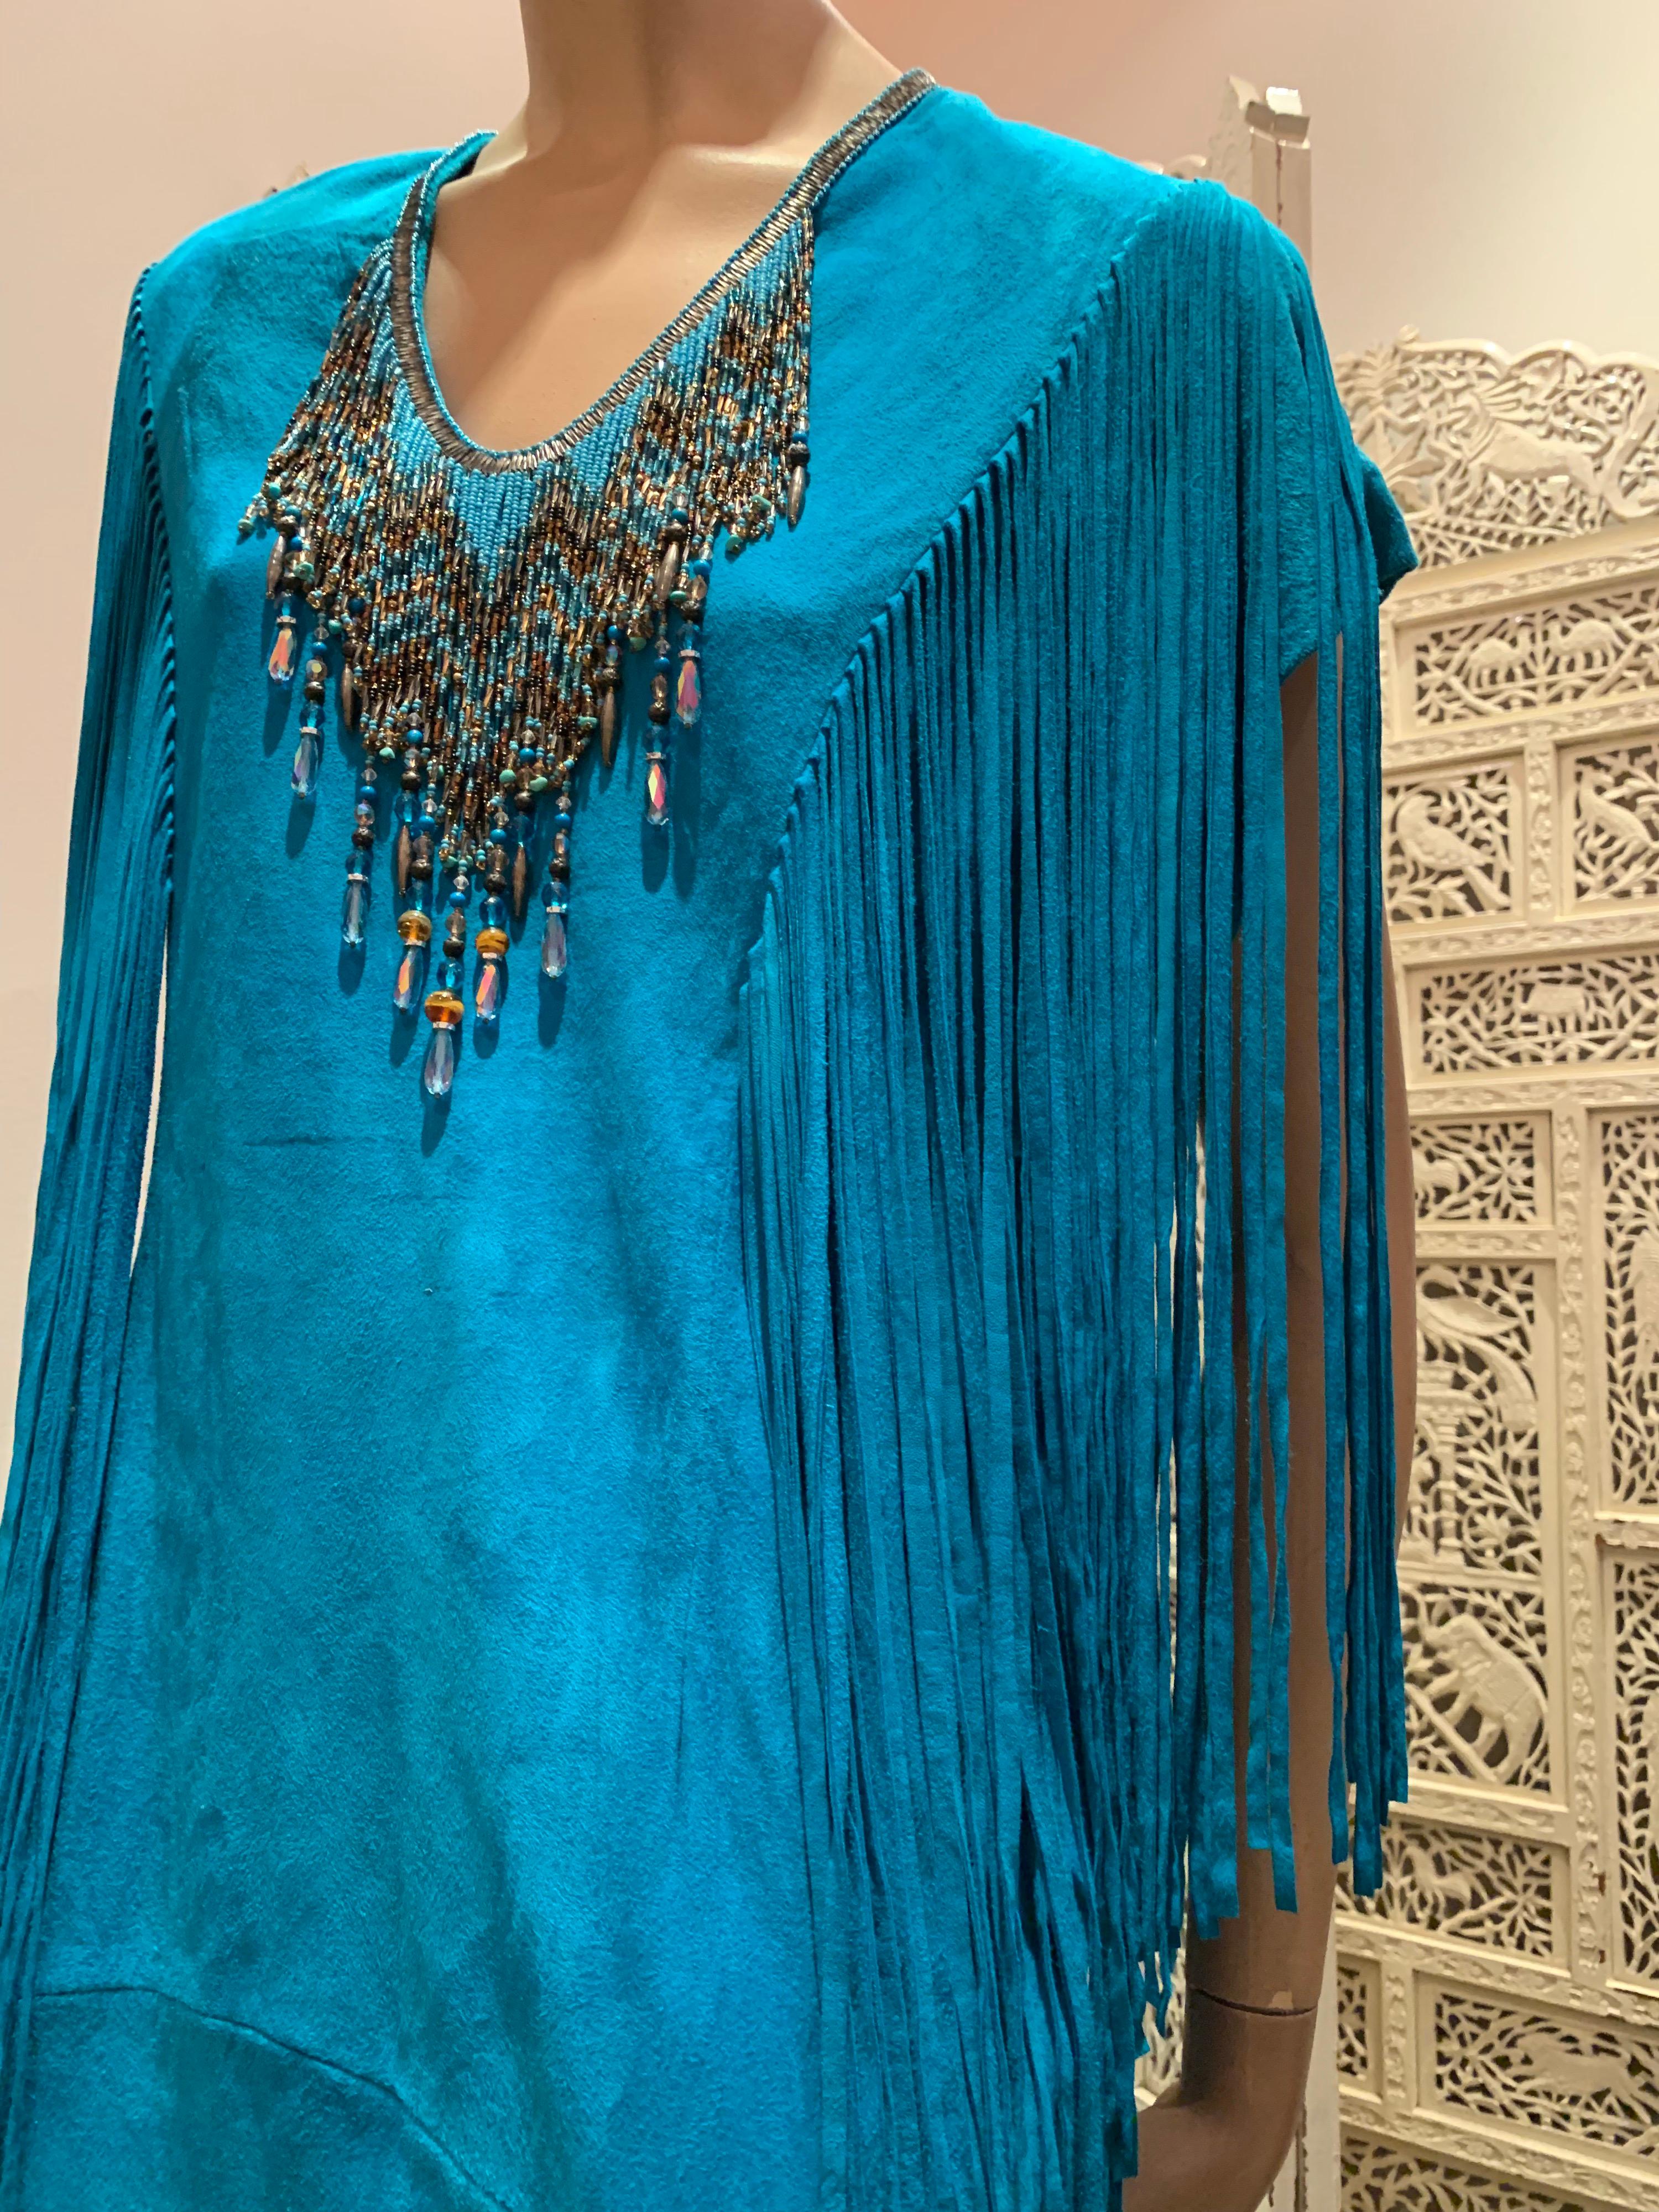 1970s Chic Skins Turquoise Suede Caftan W/ Suede & Heavy Beadwork Fringe  13